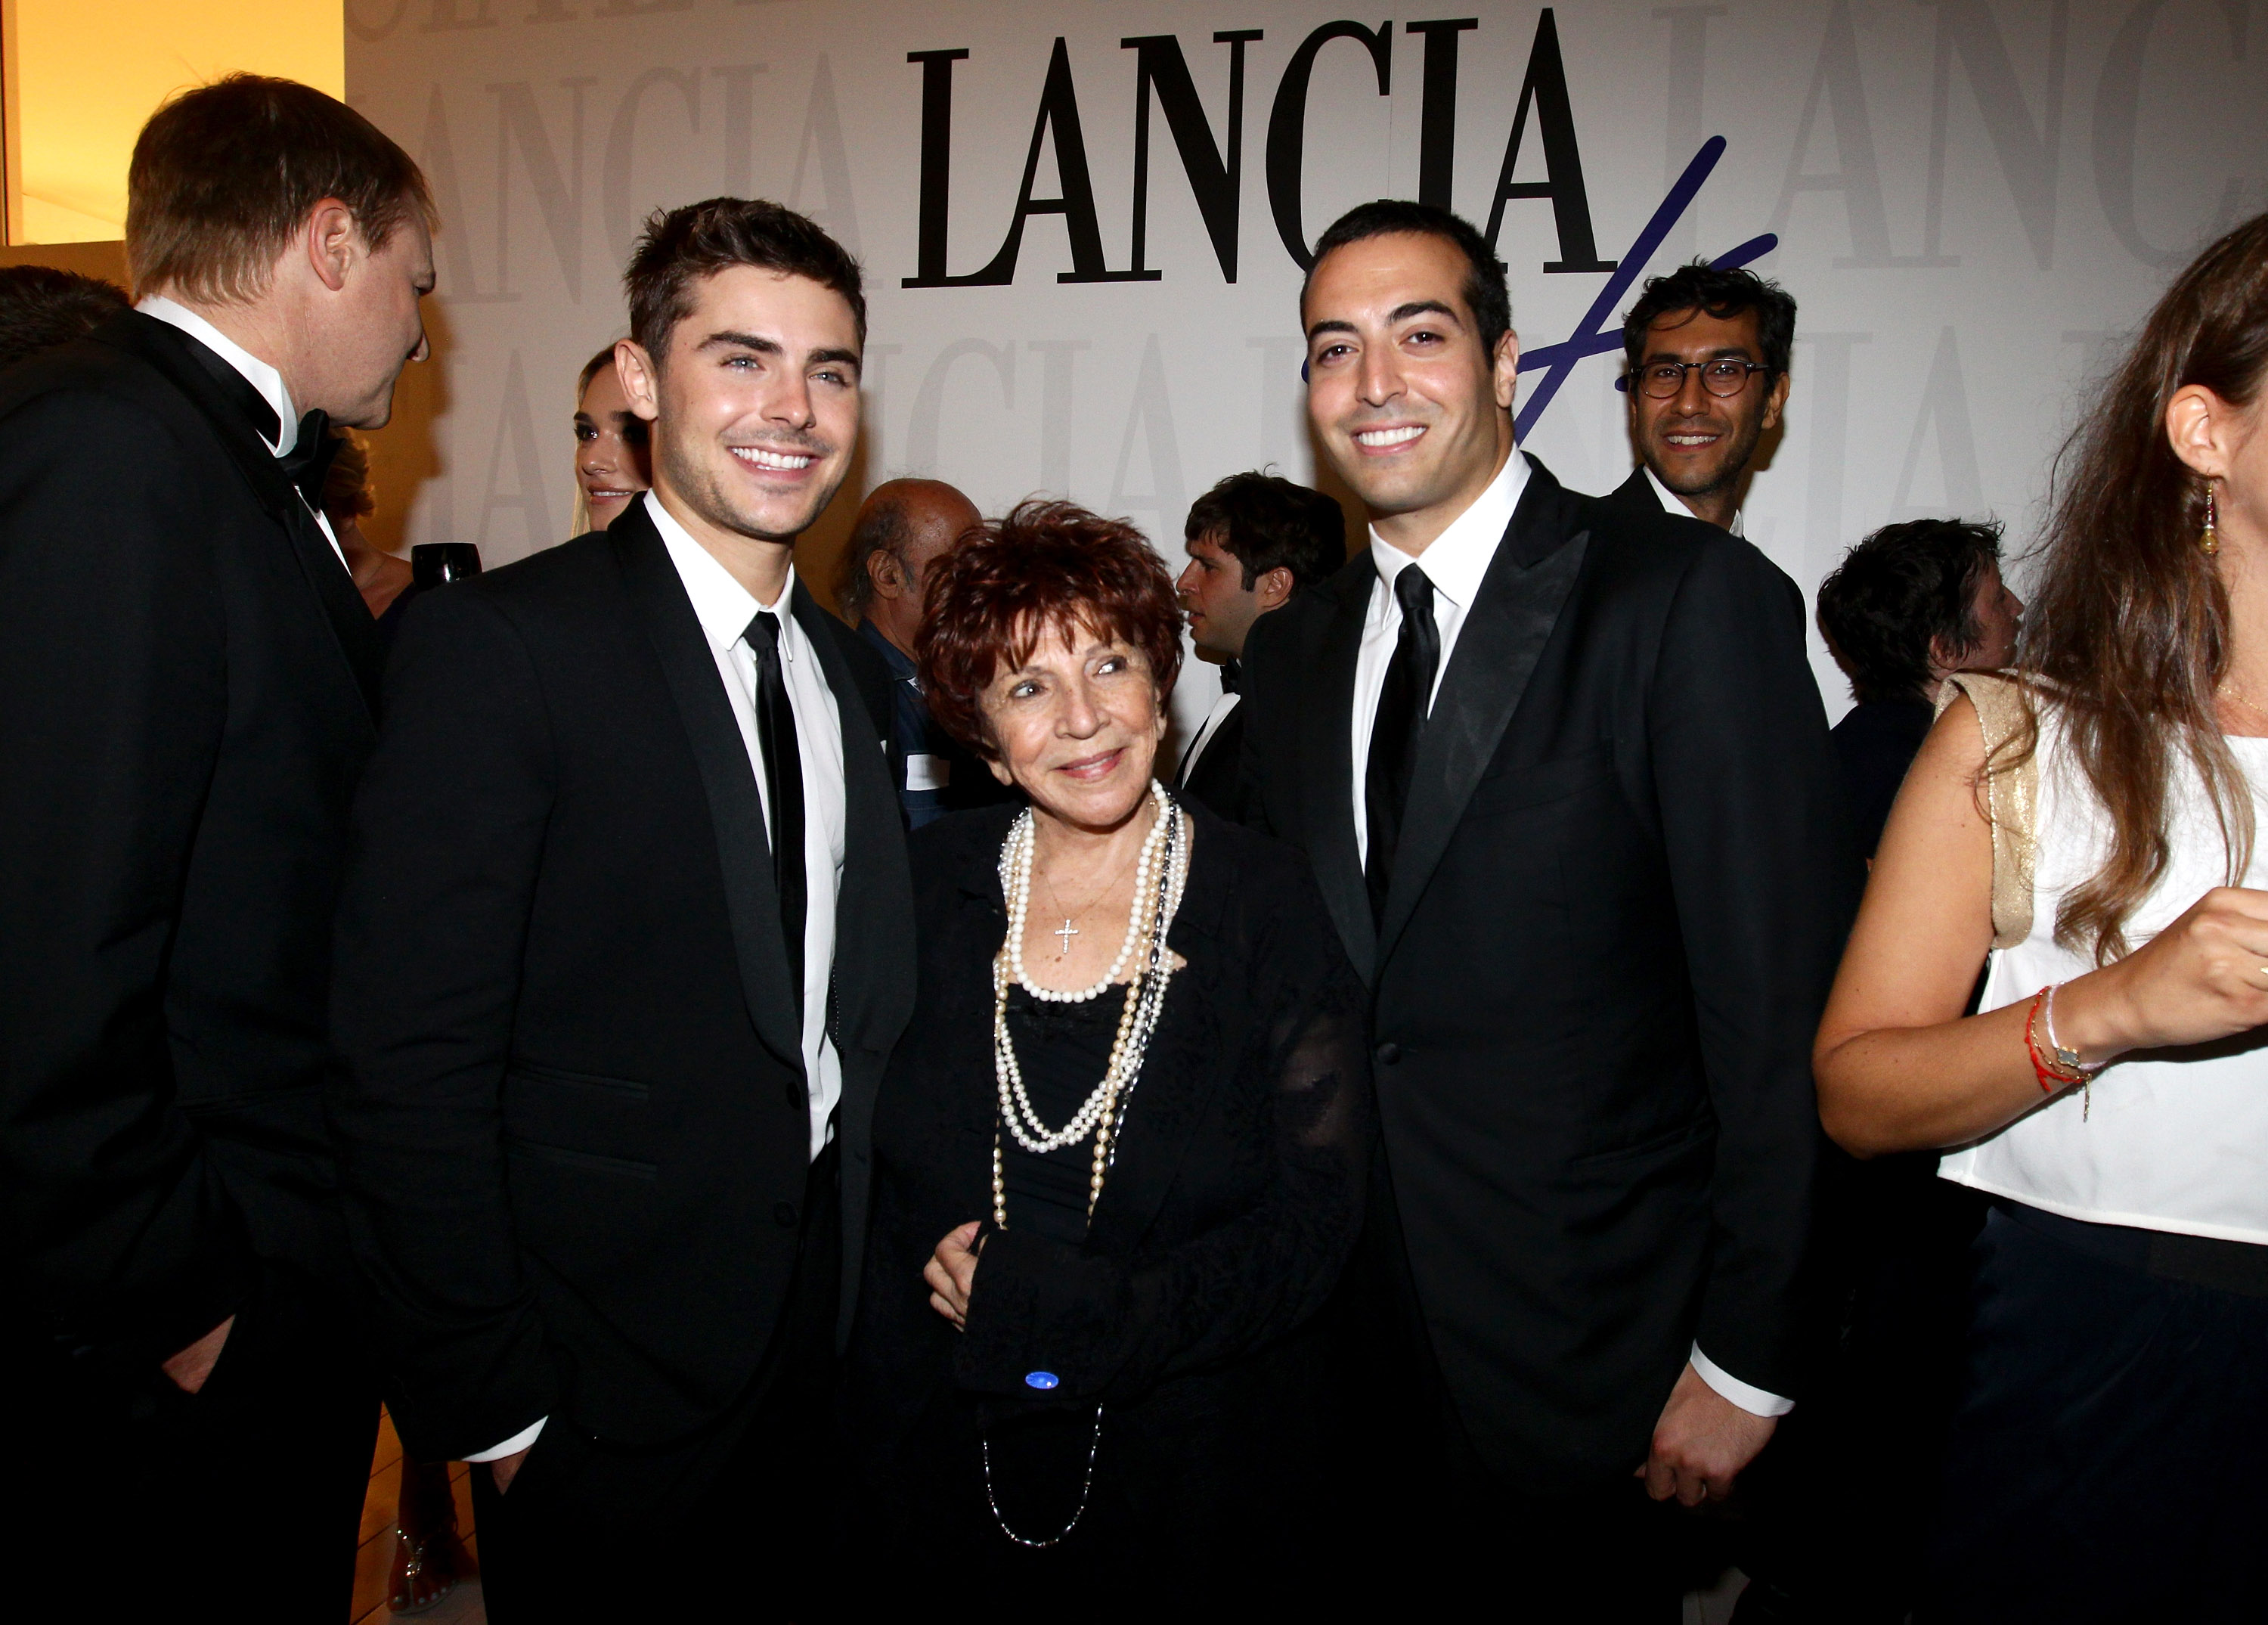 VENICE, ITALY - AUGUST 31: Zac Efron, Aida Takla-O'Reilly and Mohammed Al Turki attend the Lancia Cafe Hosts 'At Any Price' Cocktail Party during the 69th Venice International Film Festival on August 31, 2012 in Venice, Italy.